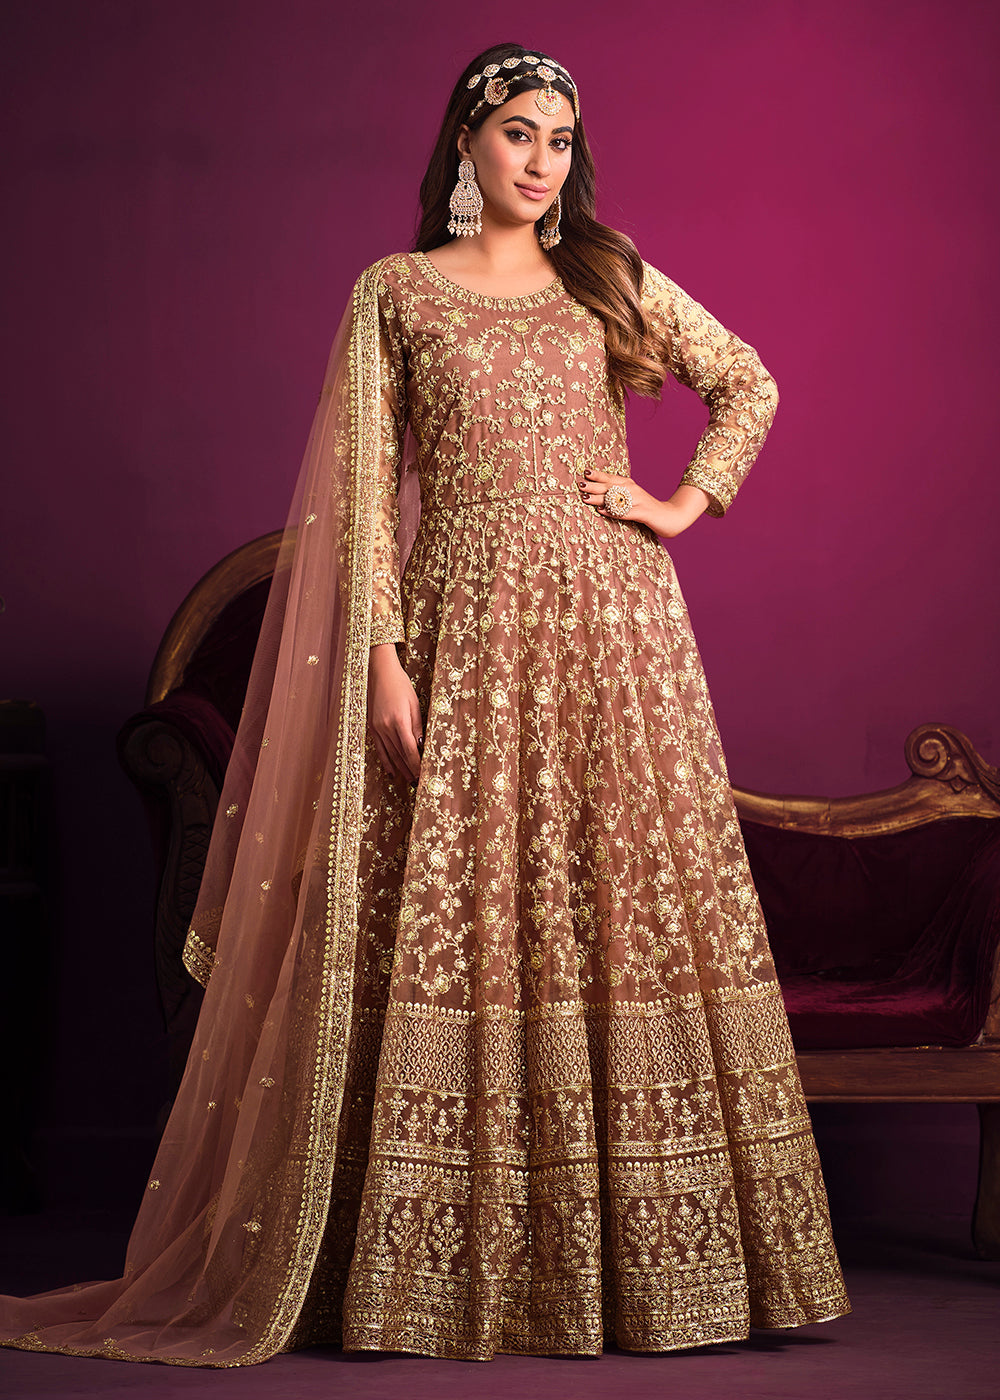 Buy Now Net Brownish Peach Floor Length Ceremonial Anarkali Suit Online in USA, UK, Australia, New Zealand, Canada, Italy & Worldwide at Empress Clothing. 